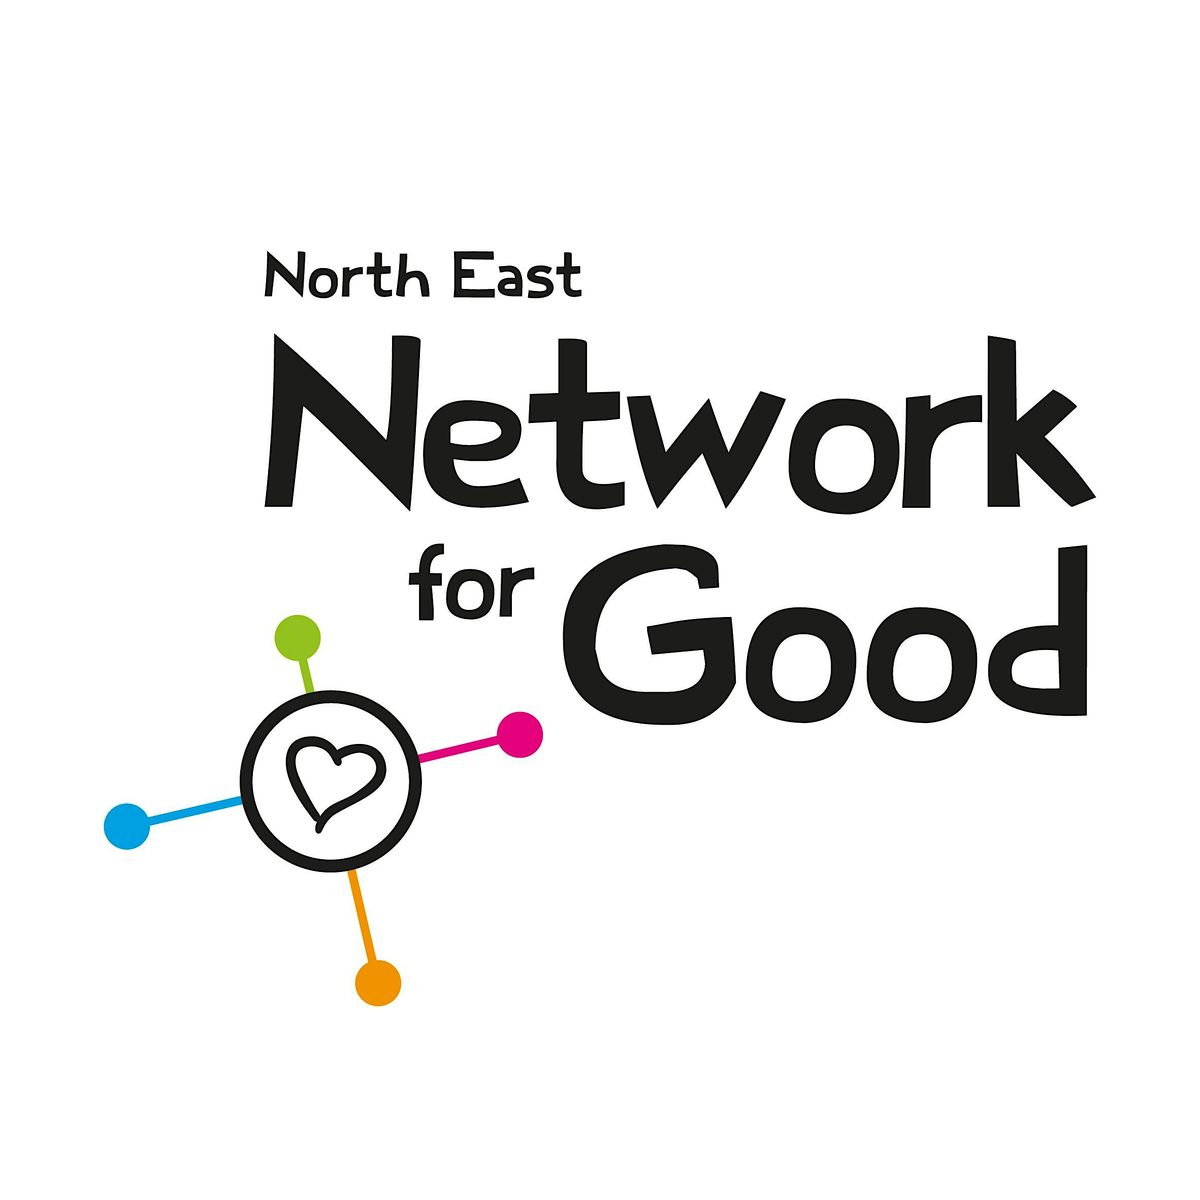 Network for Good!